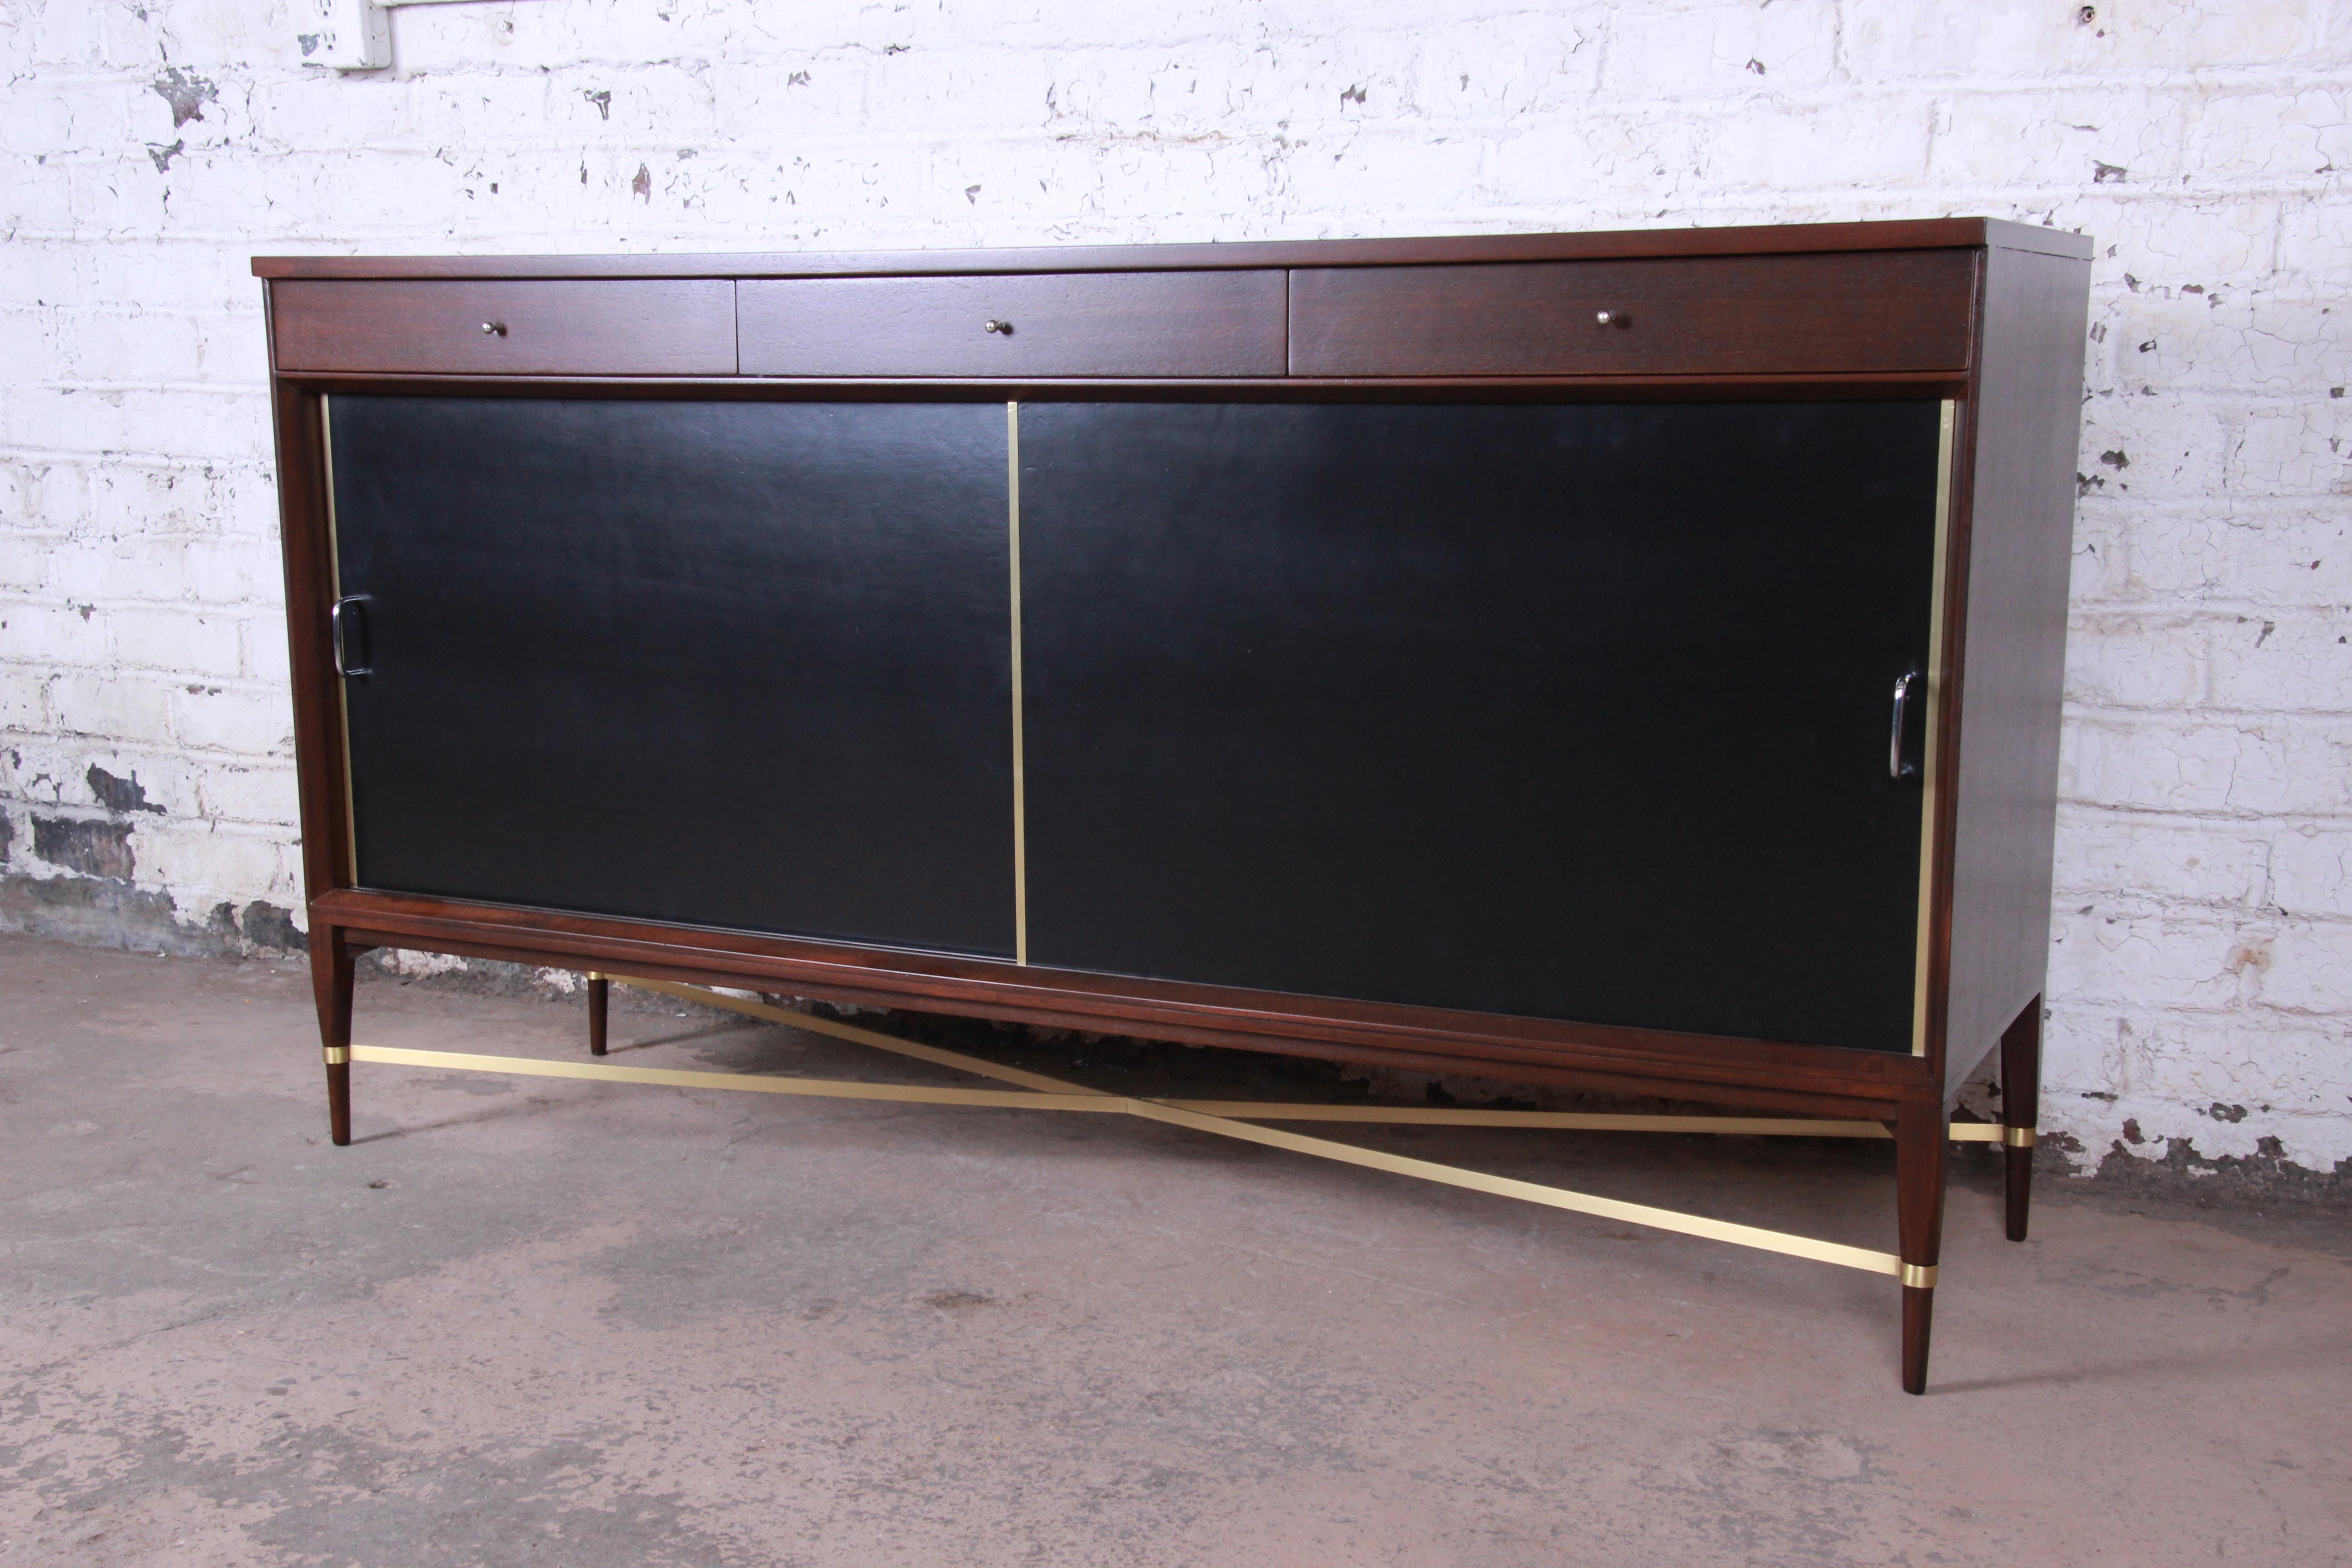 An exceptional Mid-Century Modern mahogany and brass sideboard credenza designed by Paul McCobb for his Calvin Group Collection for Calvin Furniture. The credenza features gorgeous mahogany wood grain and unique X-base brass stretchers. It offers